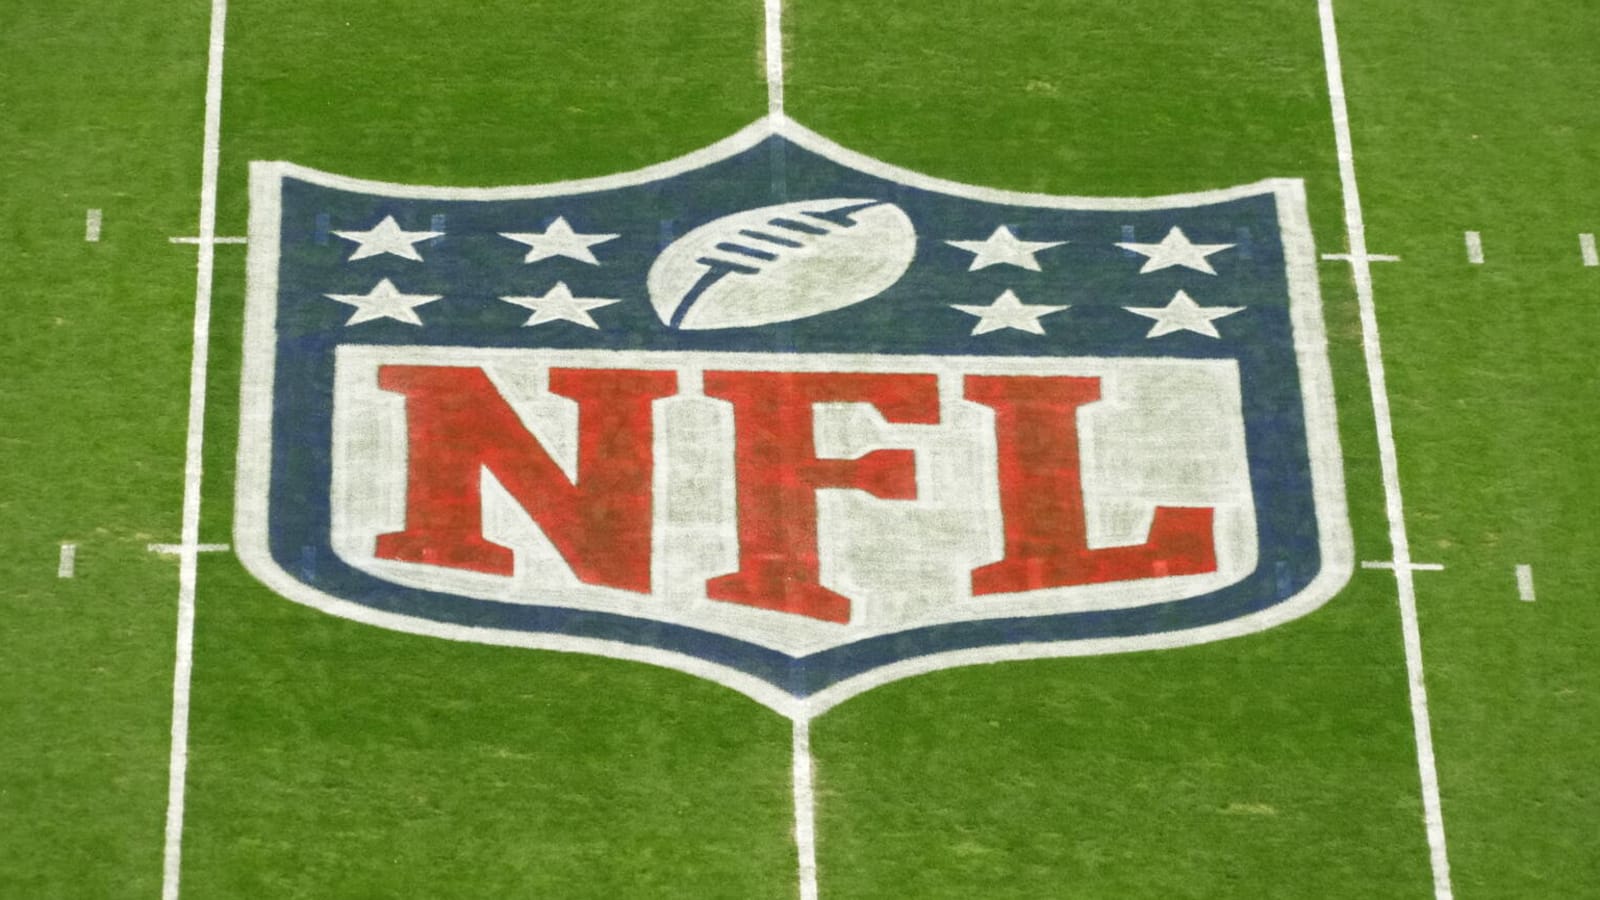 Report: NFL thinks 'Sunday Ticket' deal will generate $3 billion per year